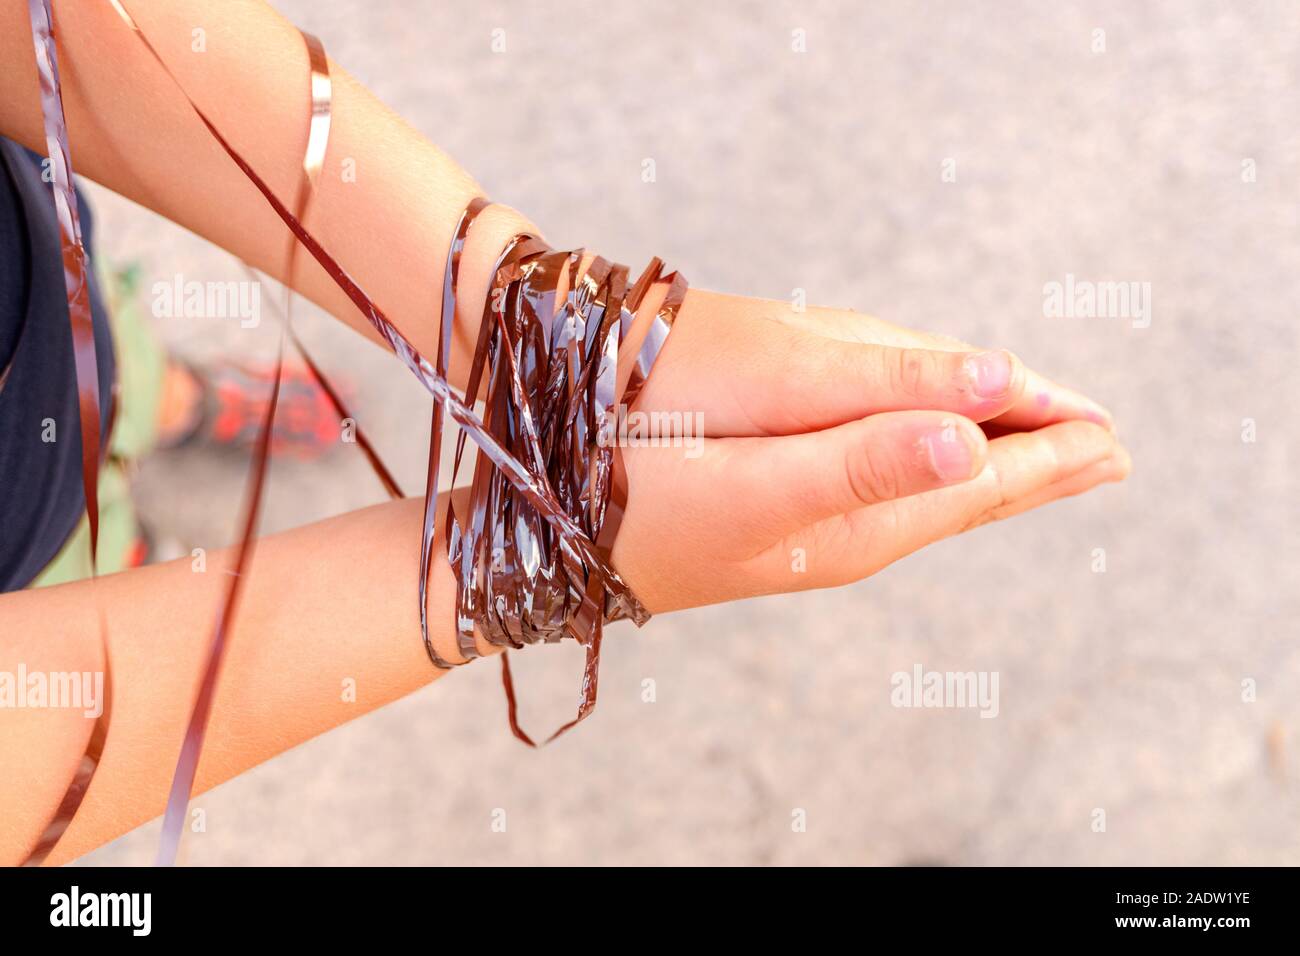 Tied hands, concept of lack of freedom and repression at different opinions. Stock Photo